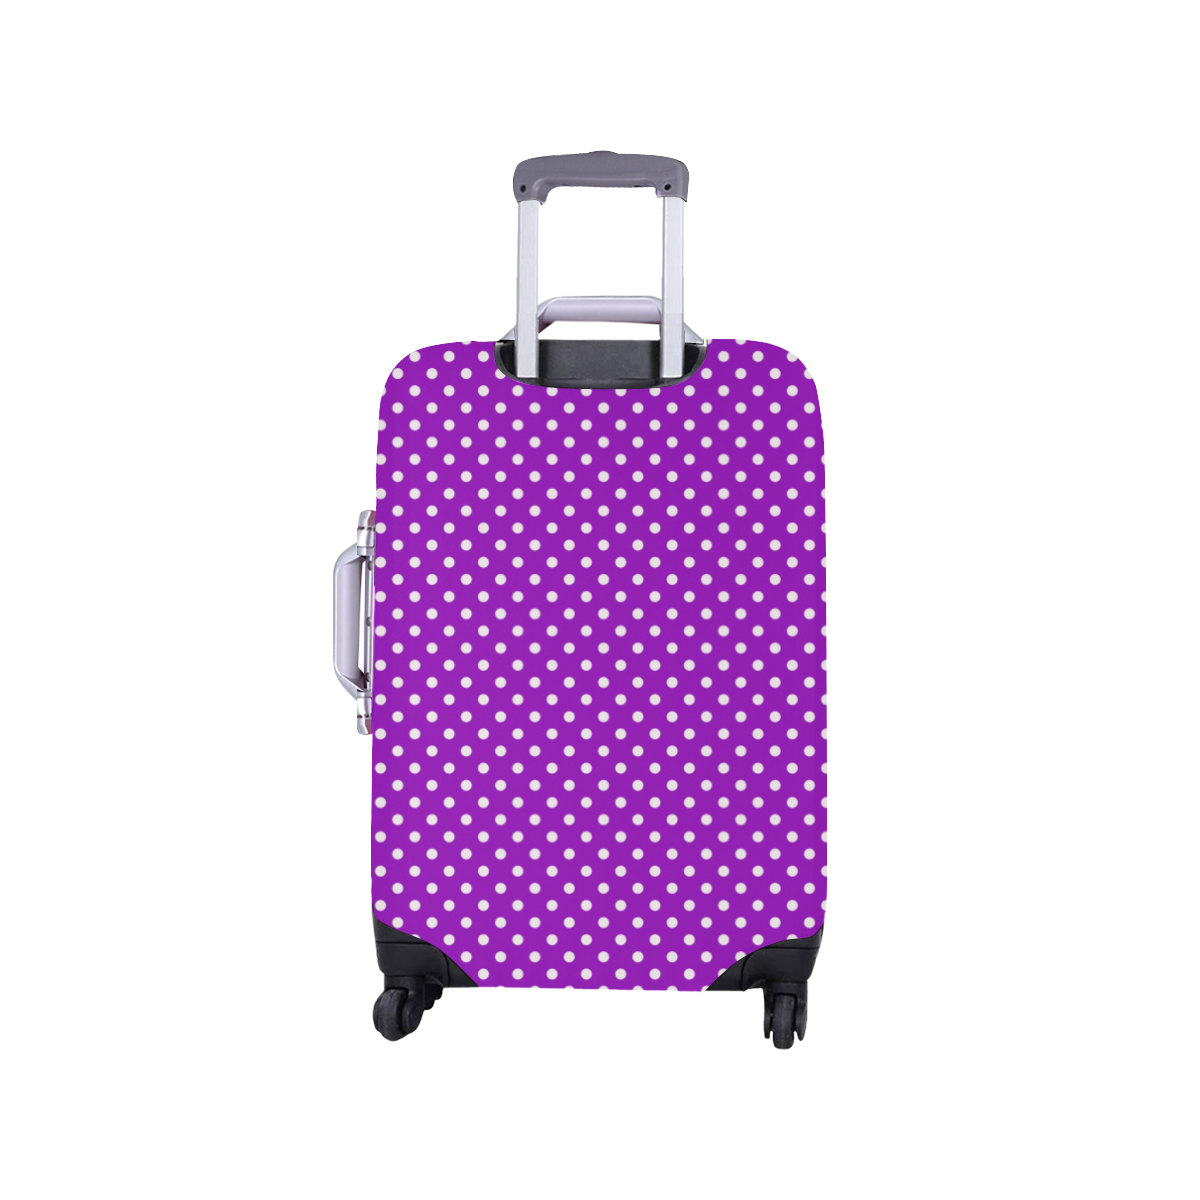 Lavander polka dots Luggage Cover/Small 18"-21"